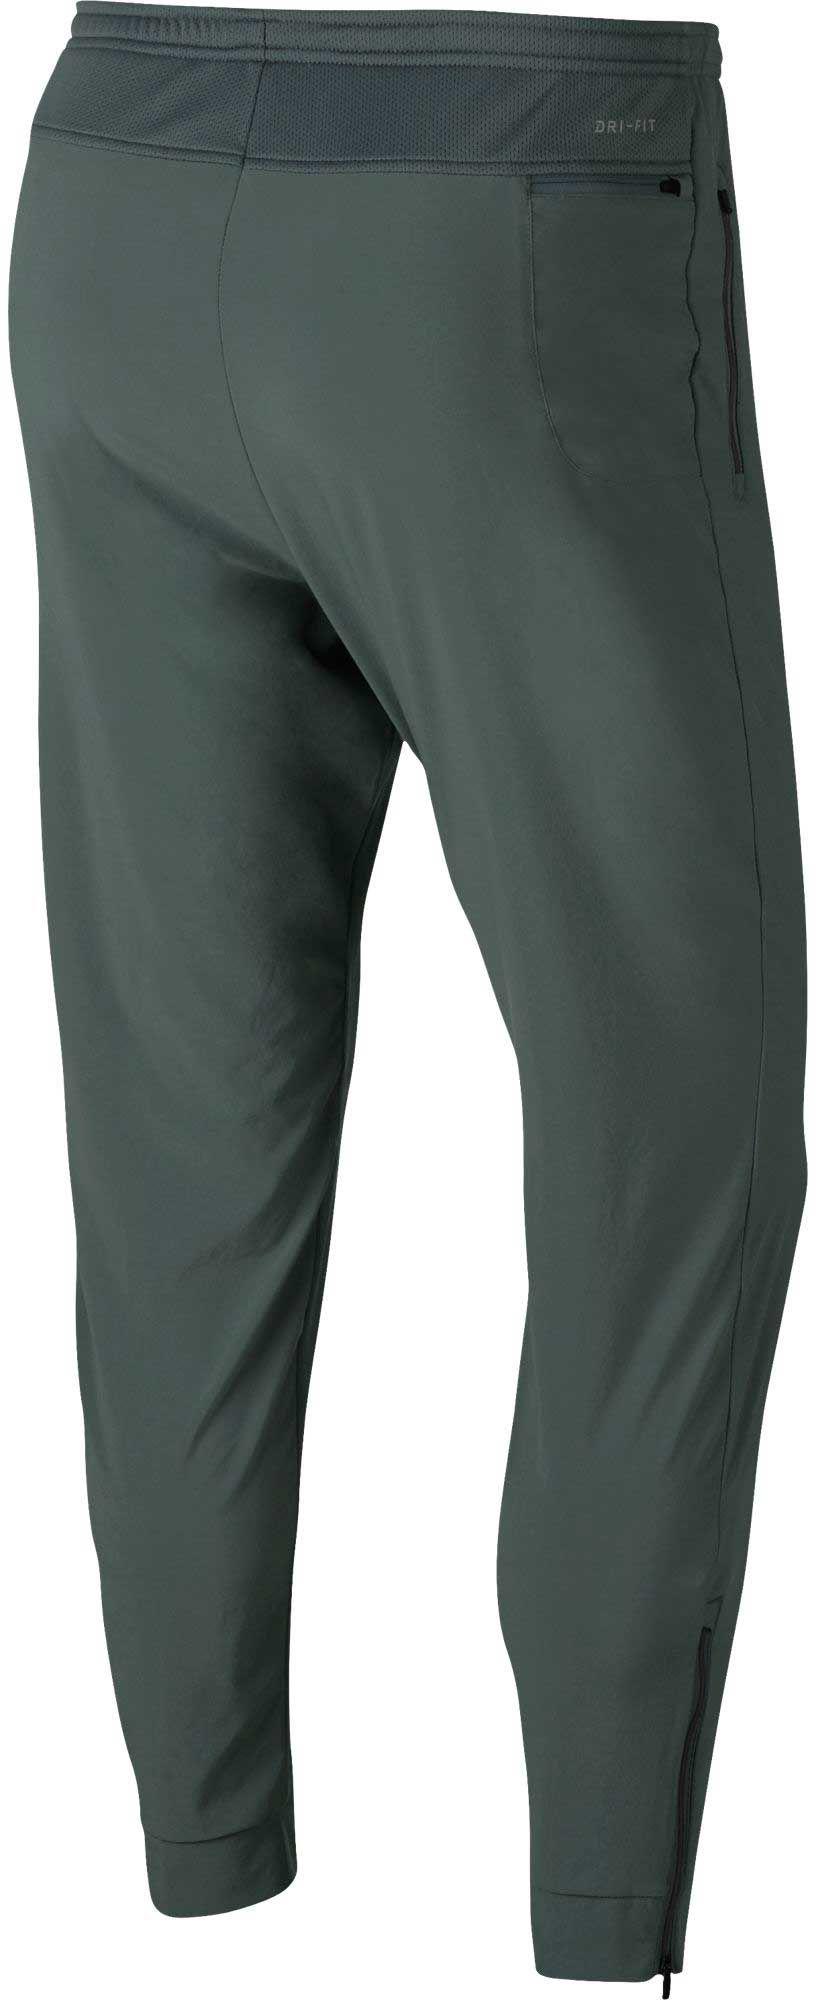 Nike Synthetic Flex Essential Running Pants in Vintage Green/White ...